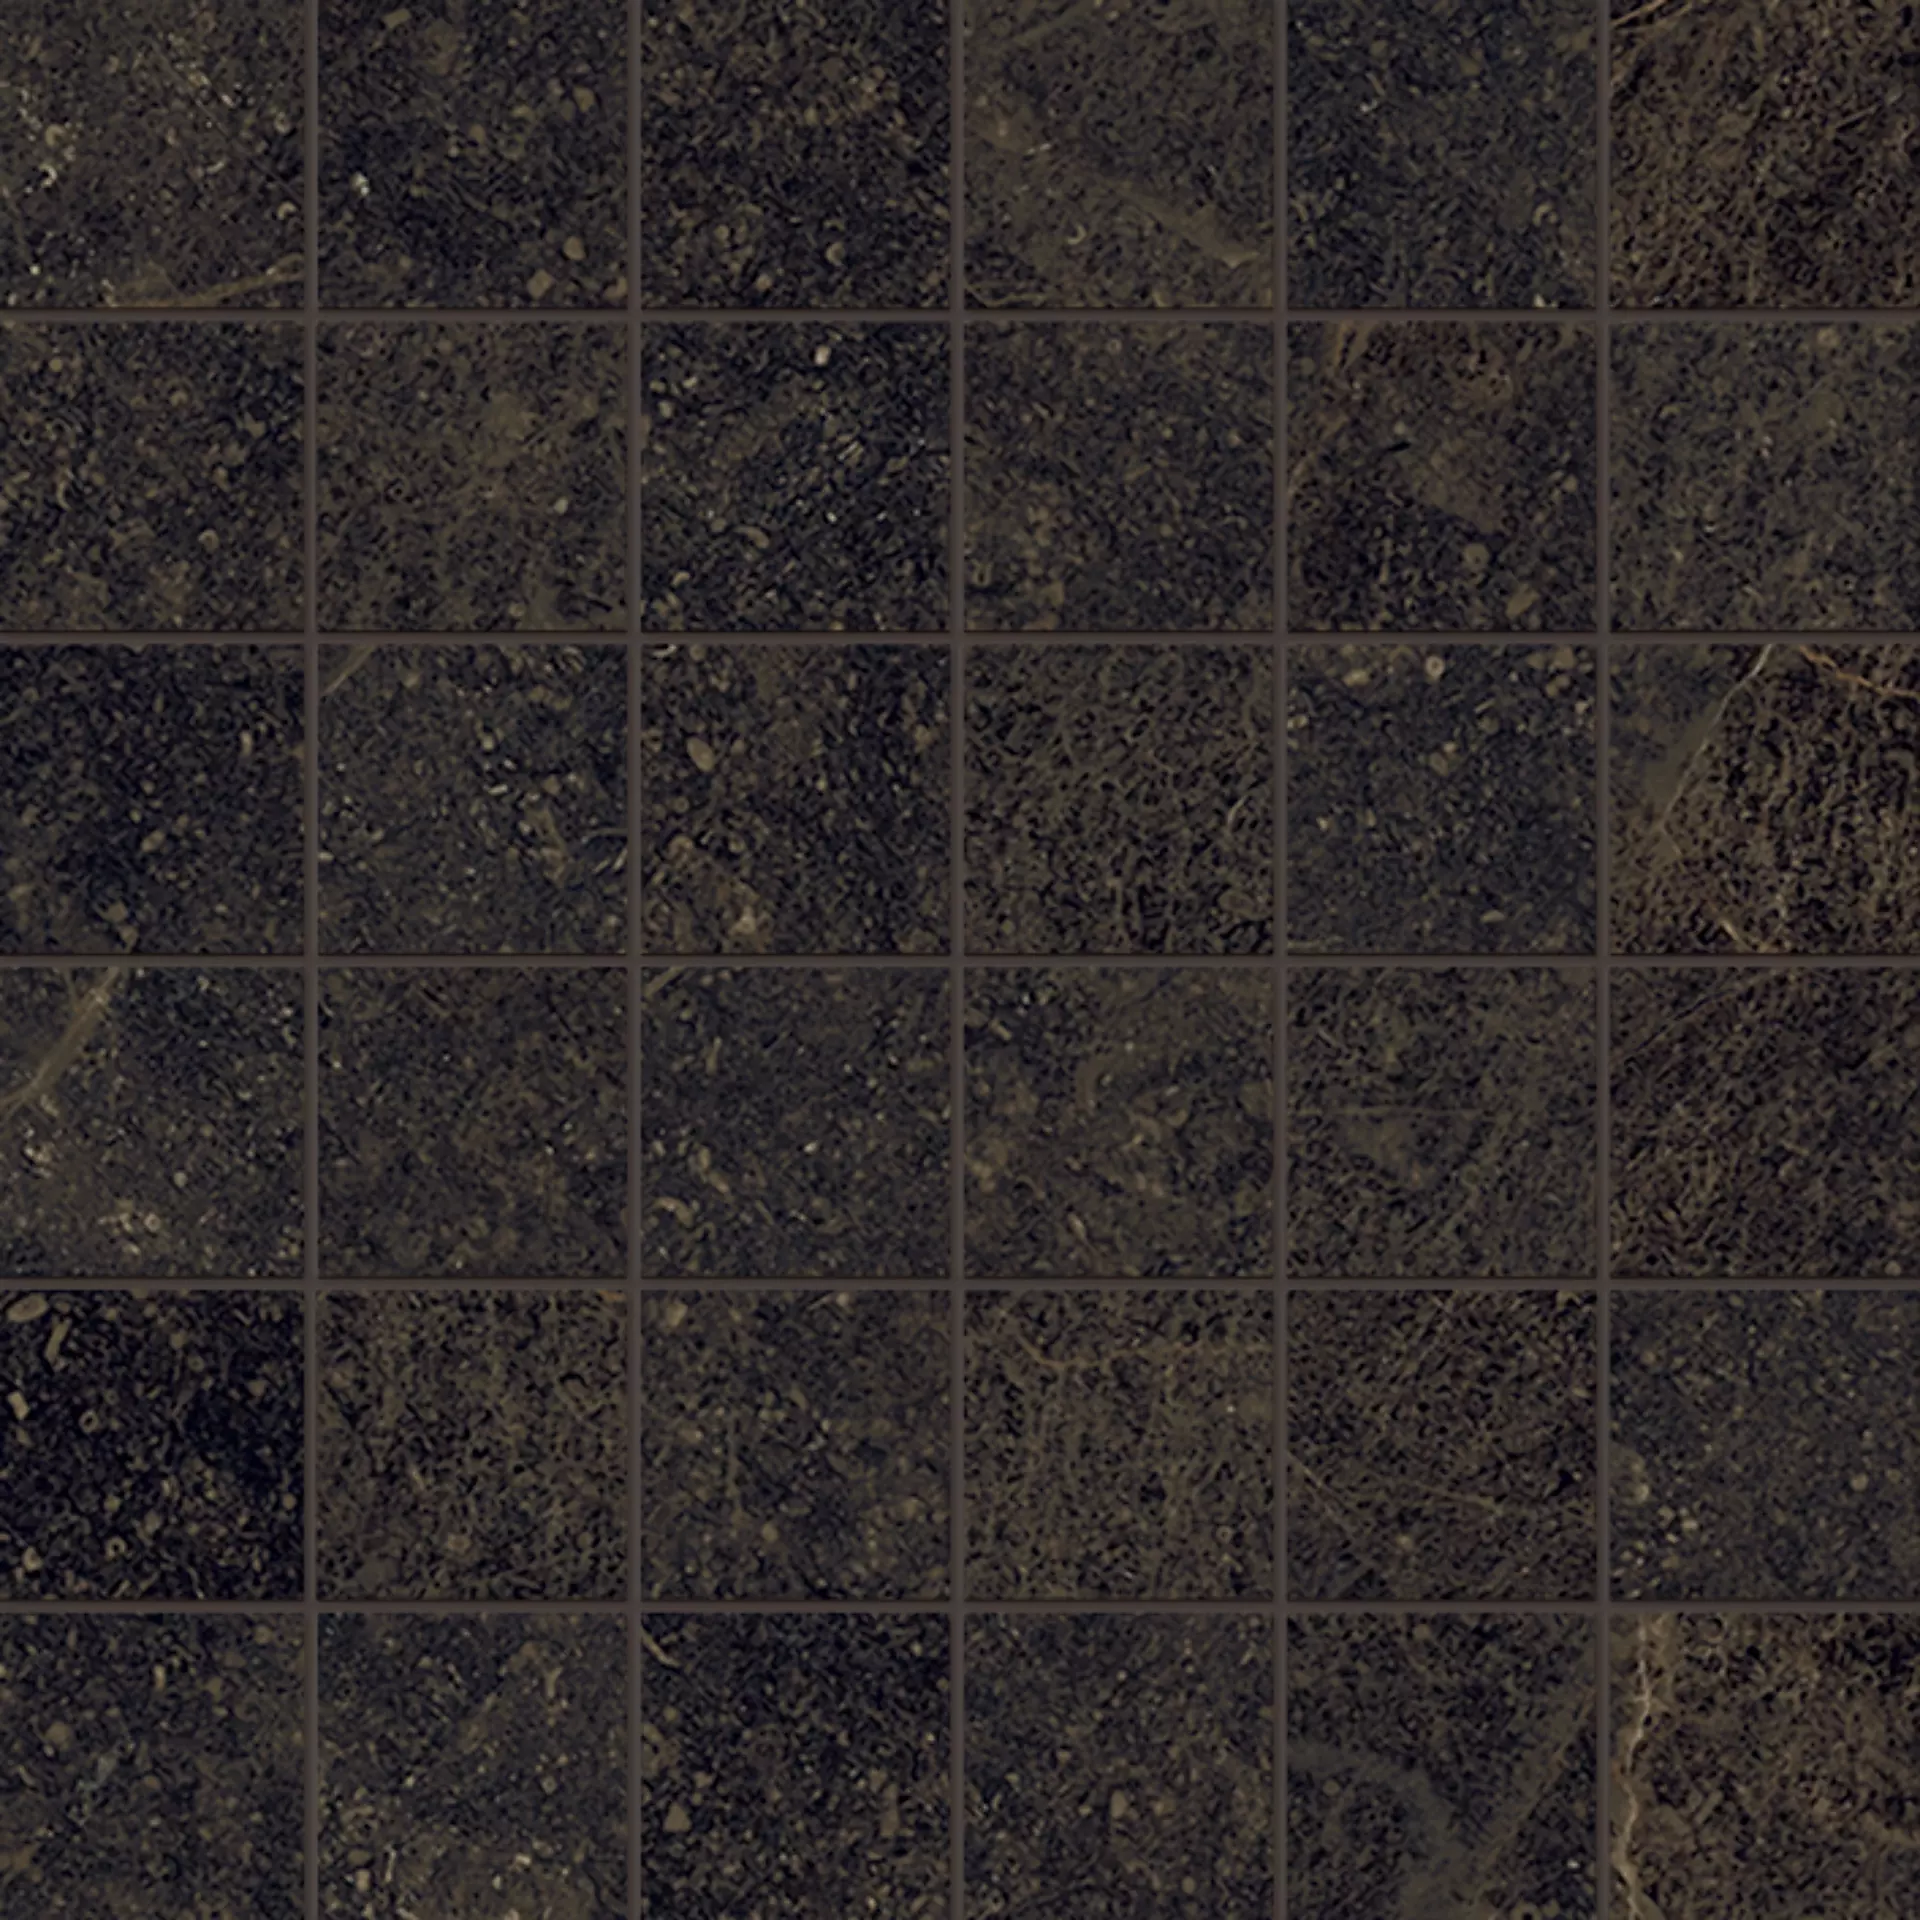 Fondovalle Planeto Pluto Natural Mosaic 36 Pezzi PNT021A 30x30cm rectified 8,5mm